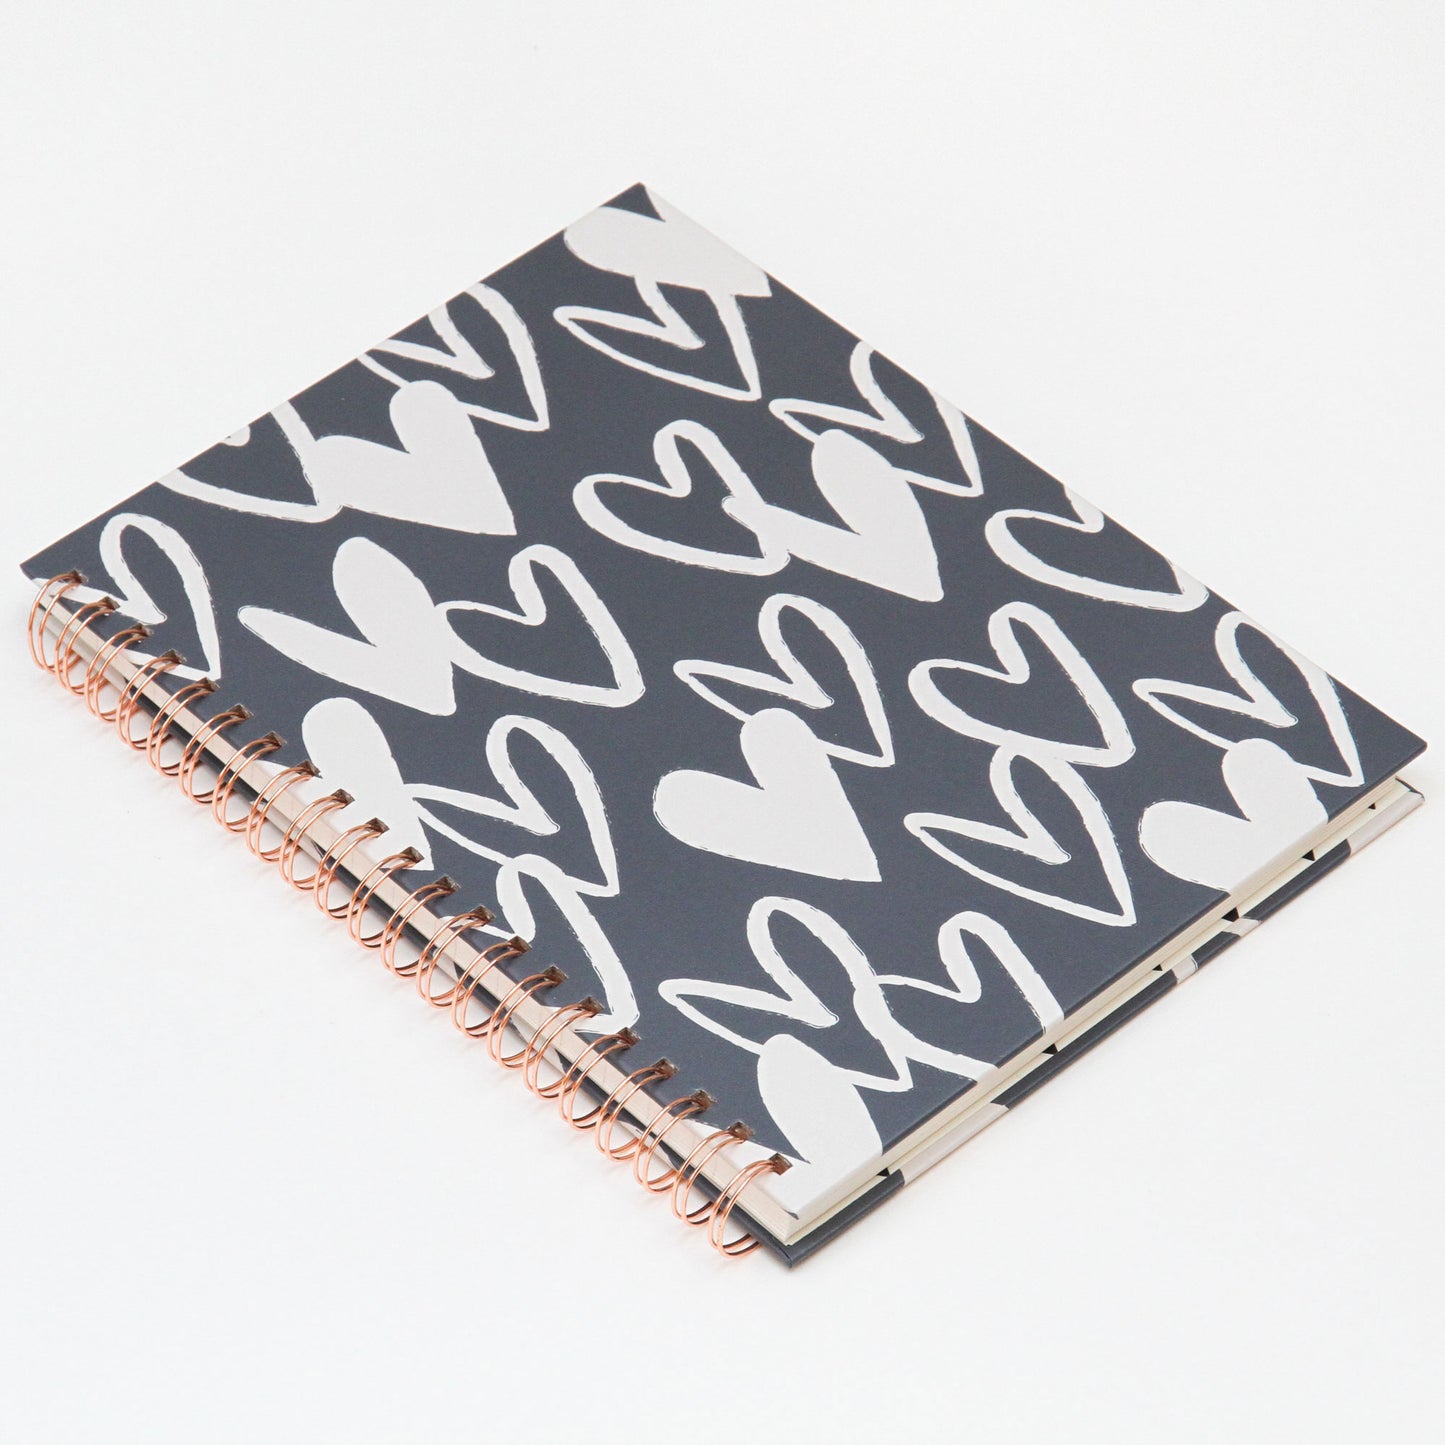 Charcoal Hearts Spiral Notebook